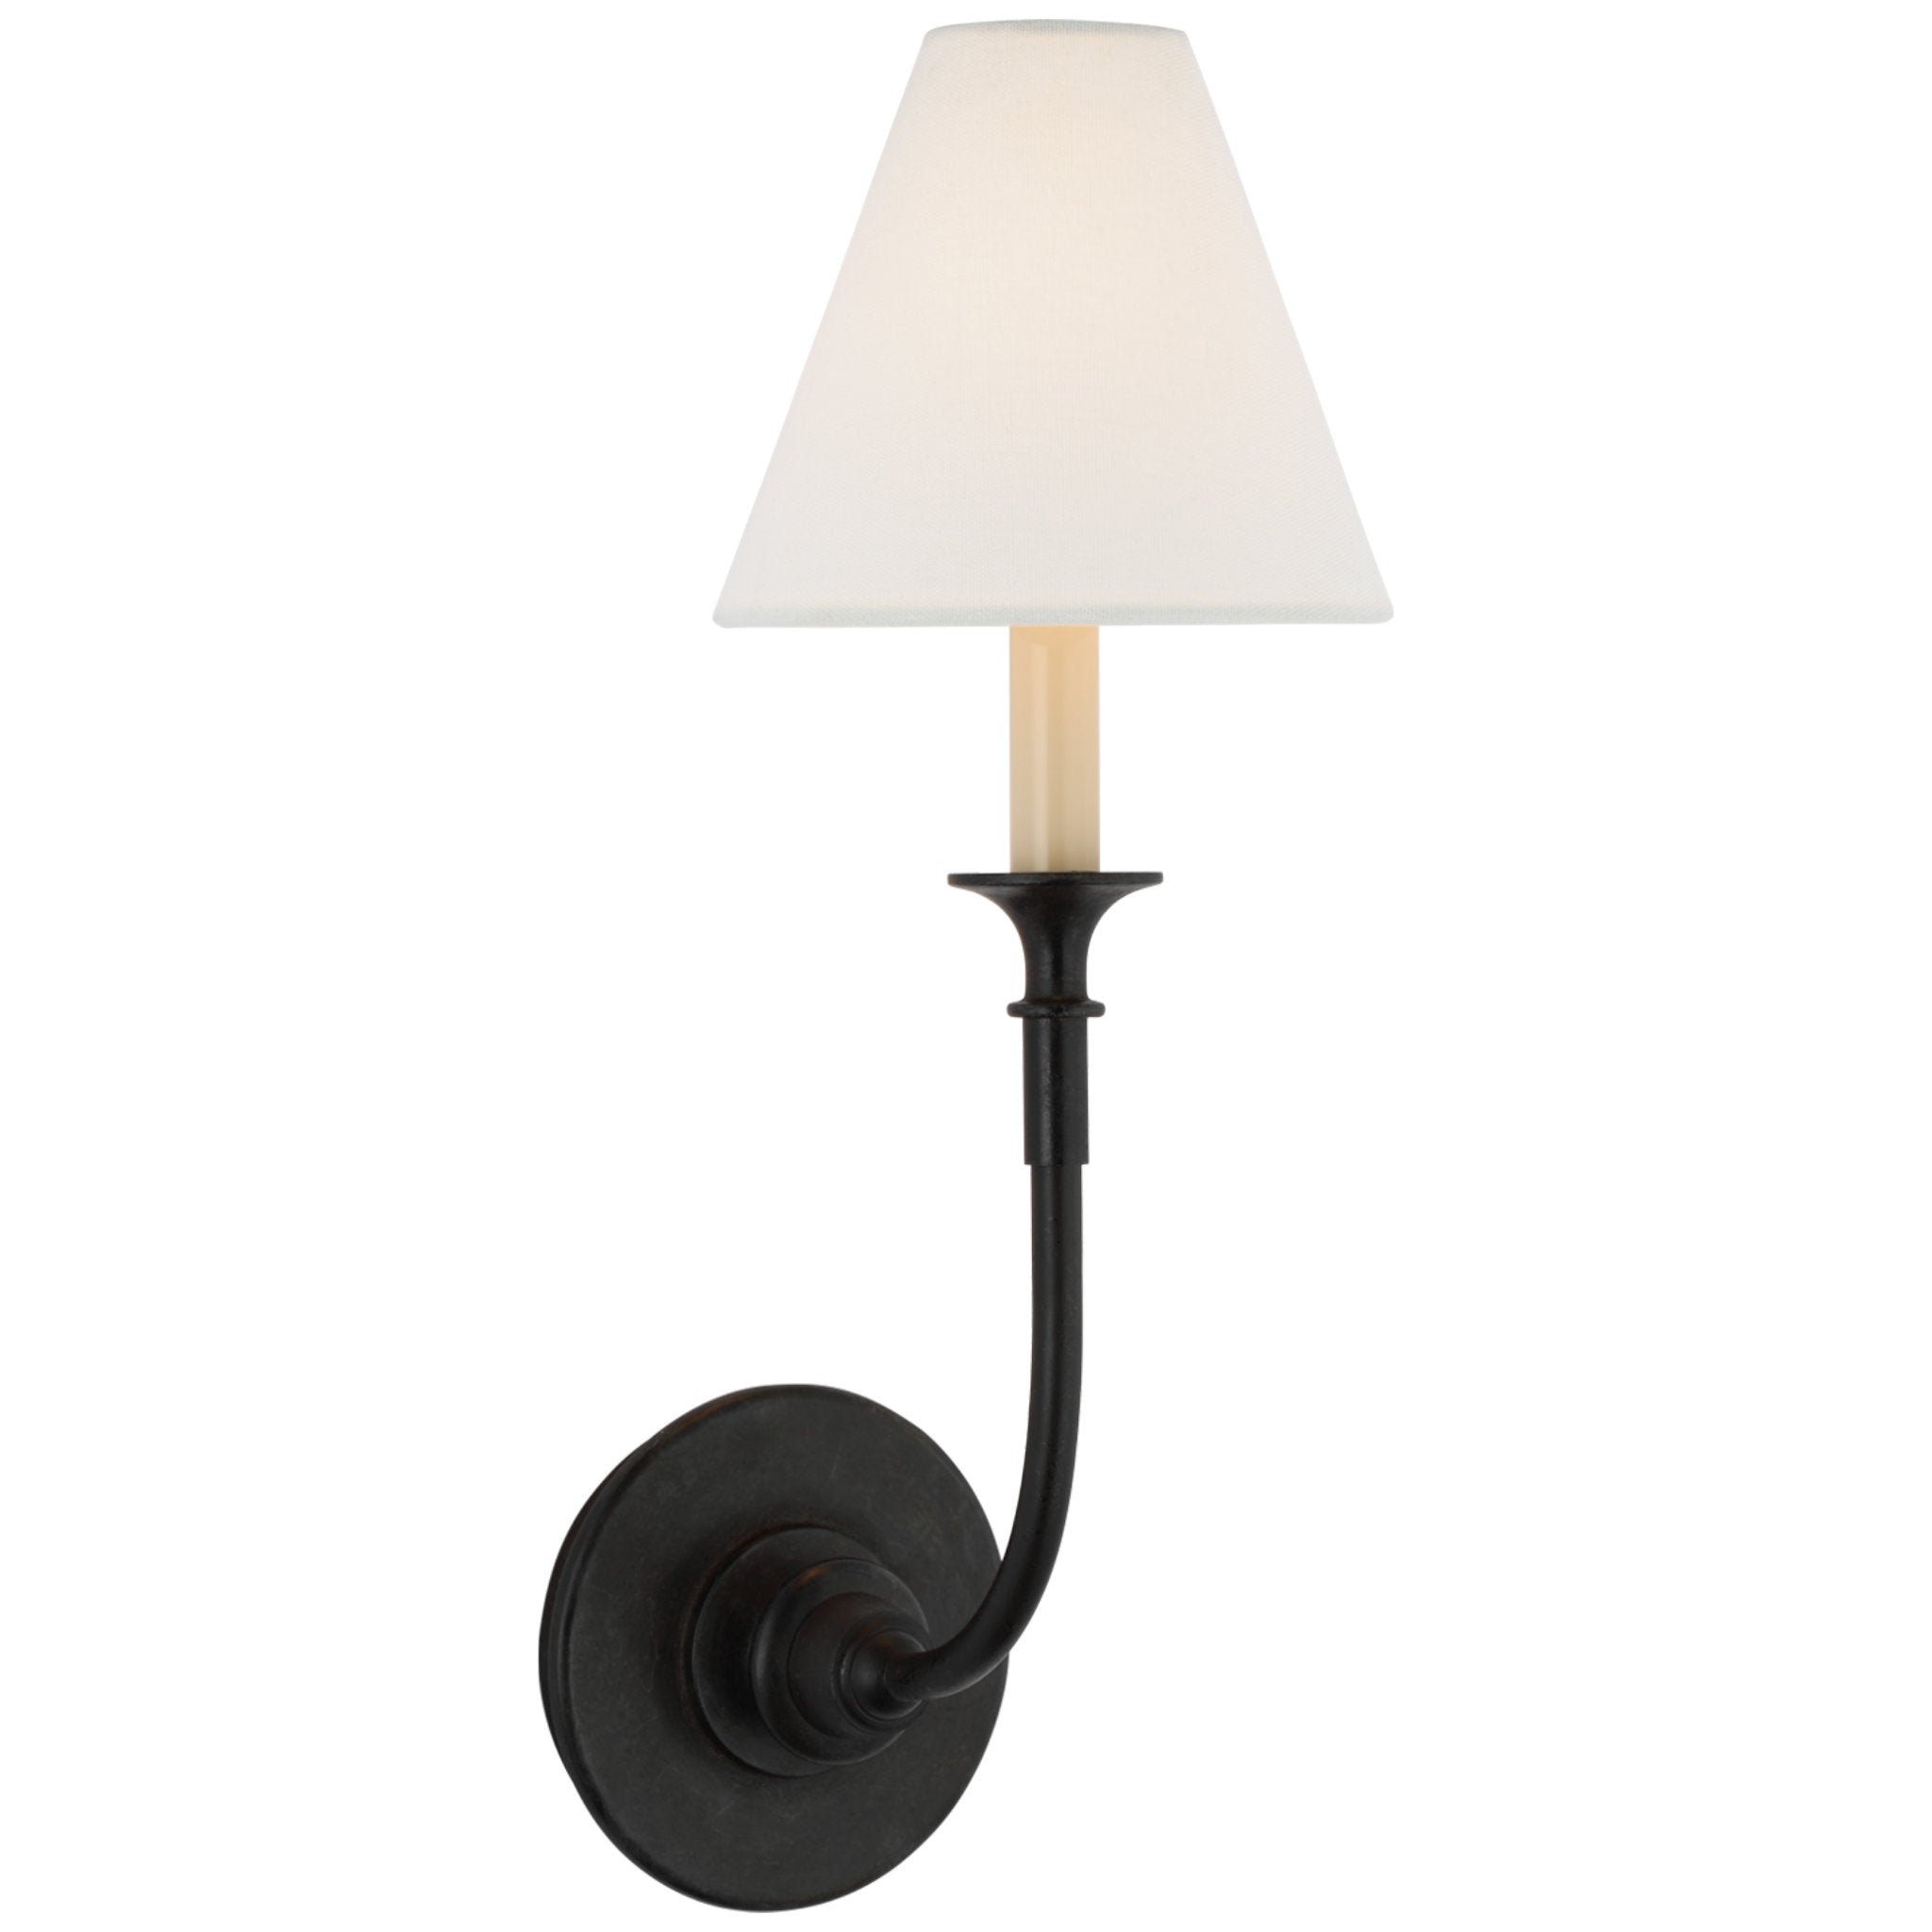 Thomas O'Brien Piaf Single Sconce in Aged Iron with Linen Shade